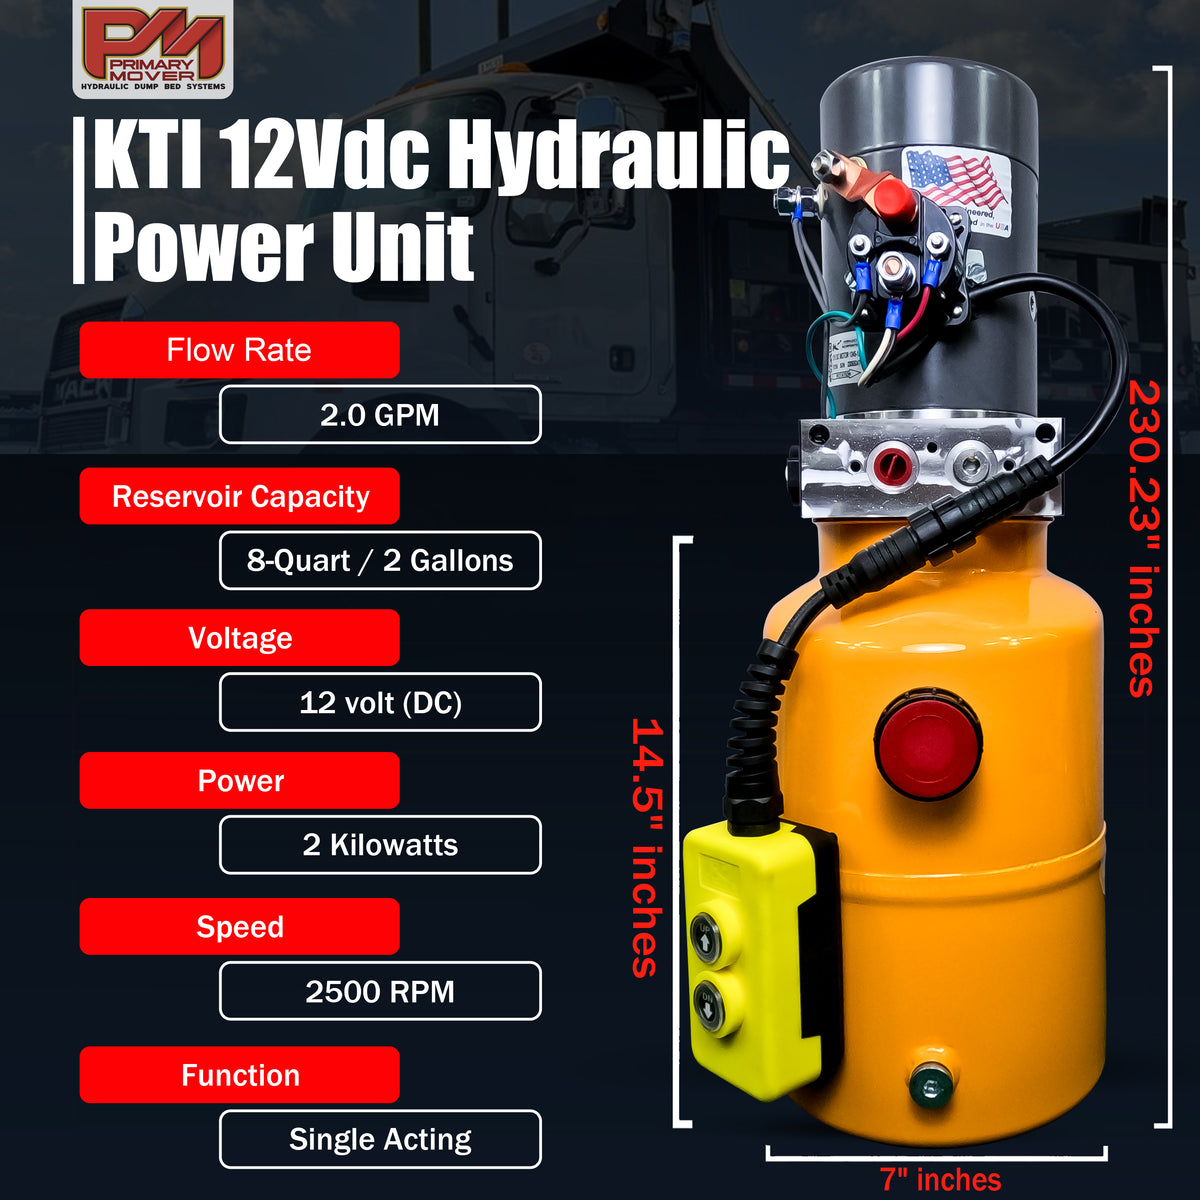 KTI 12V Single-Acting Hydraulic Pump with steel reservoir, featuring a compact yellow and silver design, red buttons, and optimized for hydraulic dump bed systems.